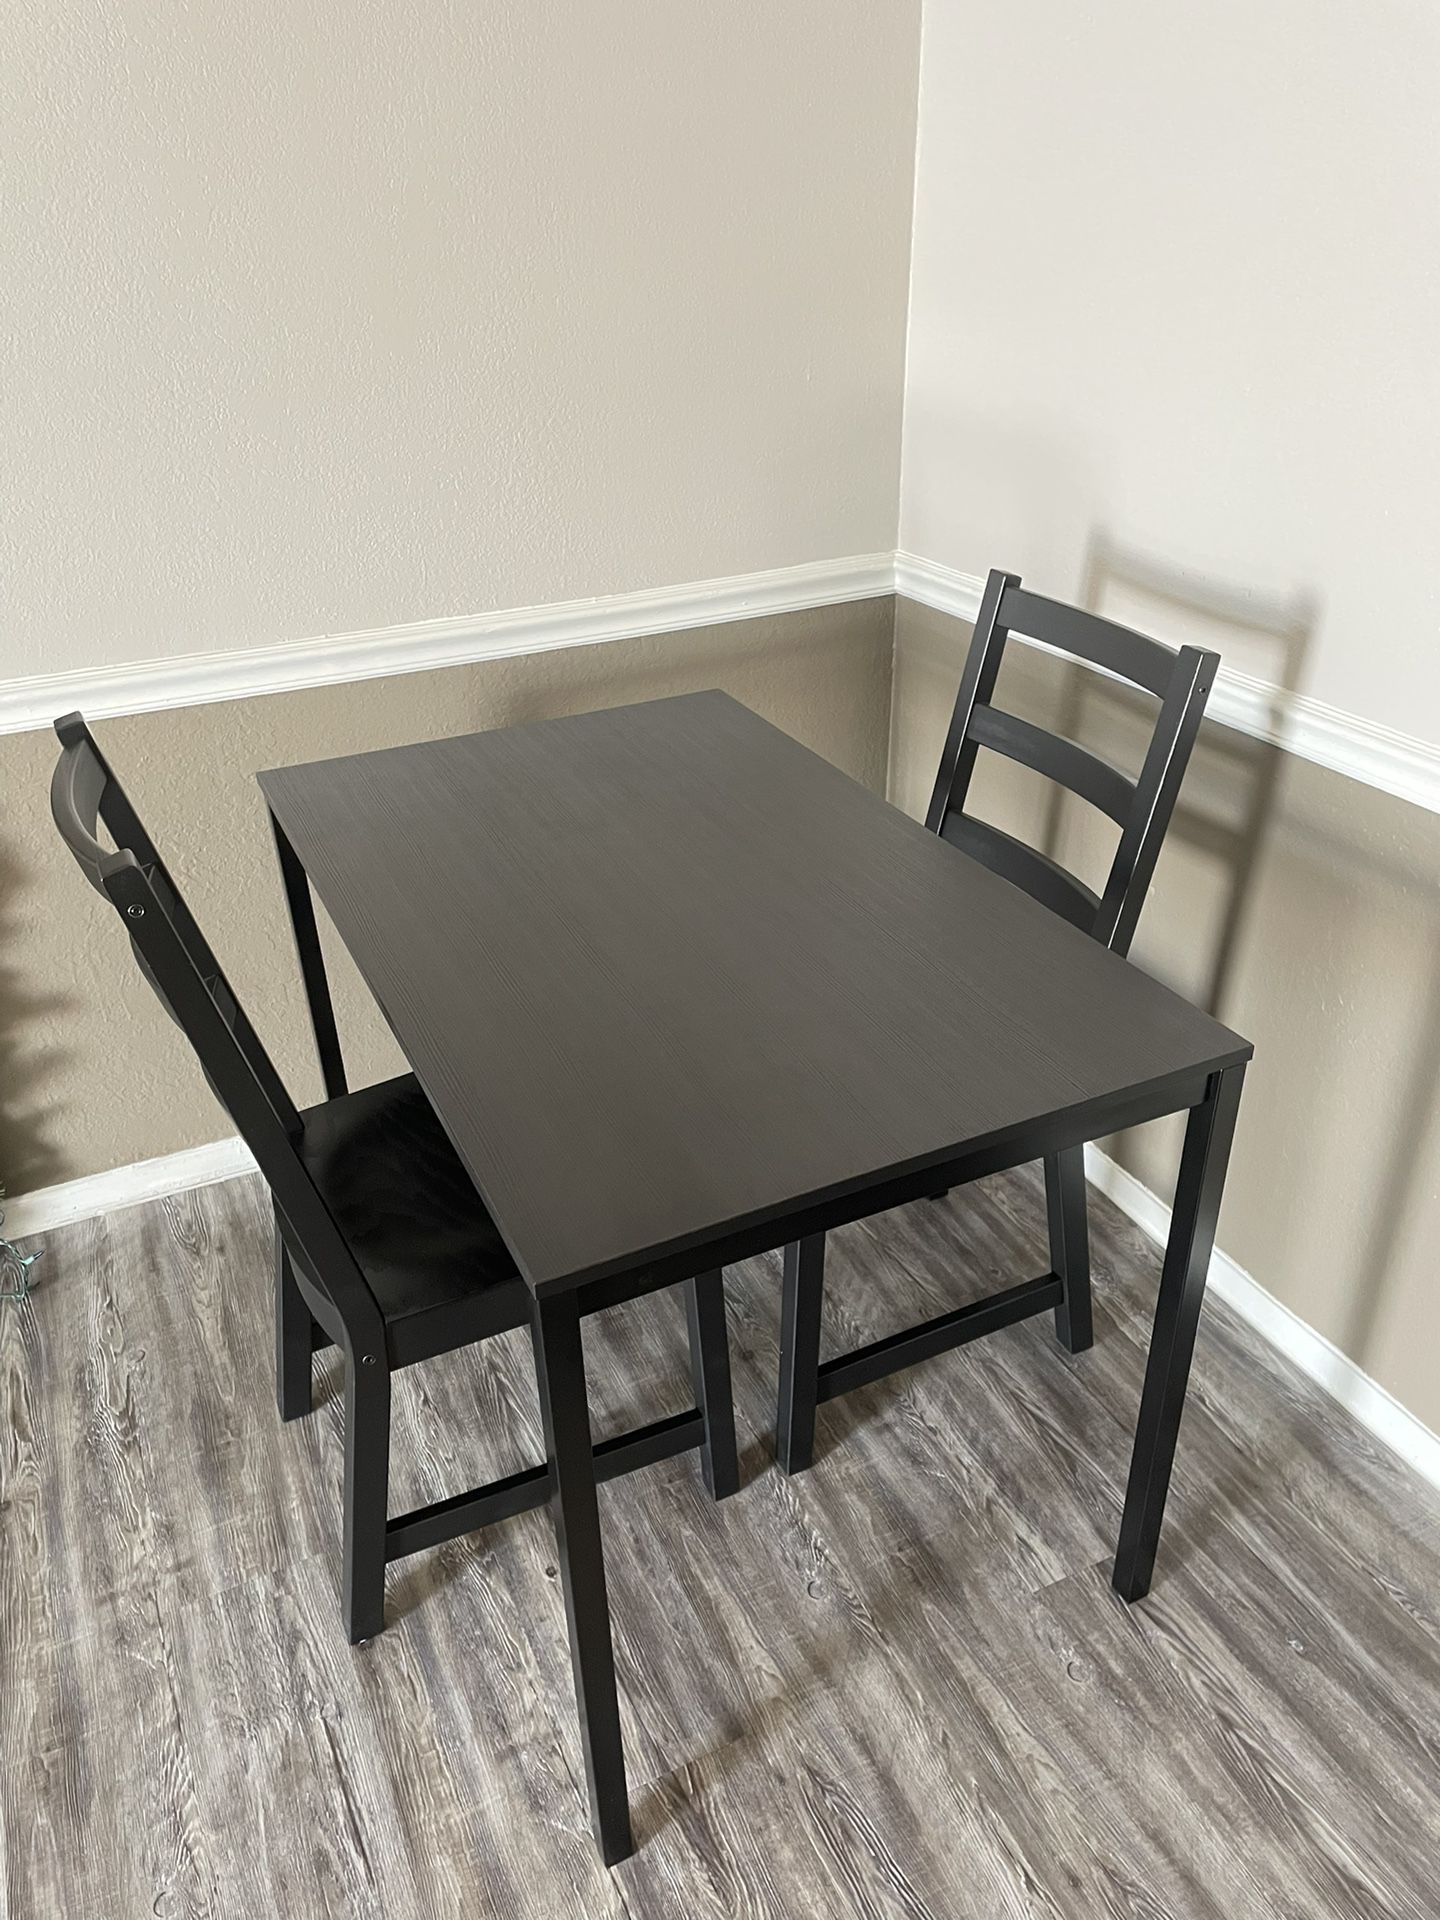 Small Kitchen Table With 2 Chairs 